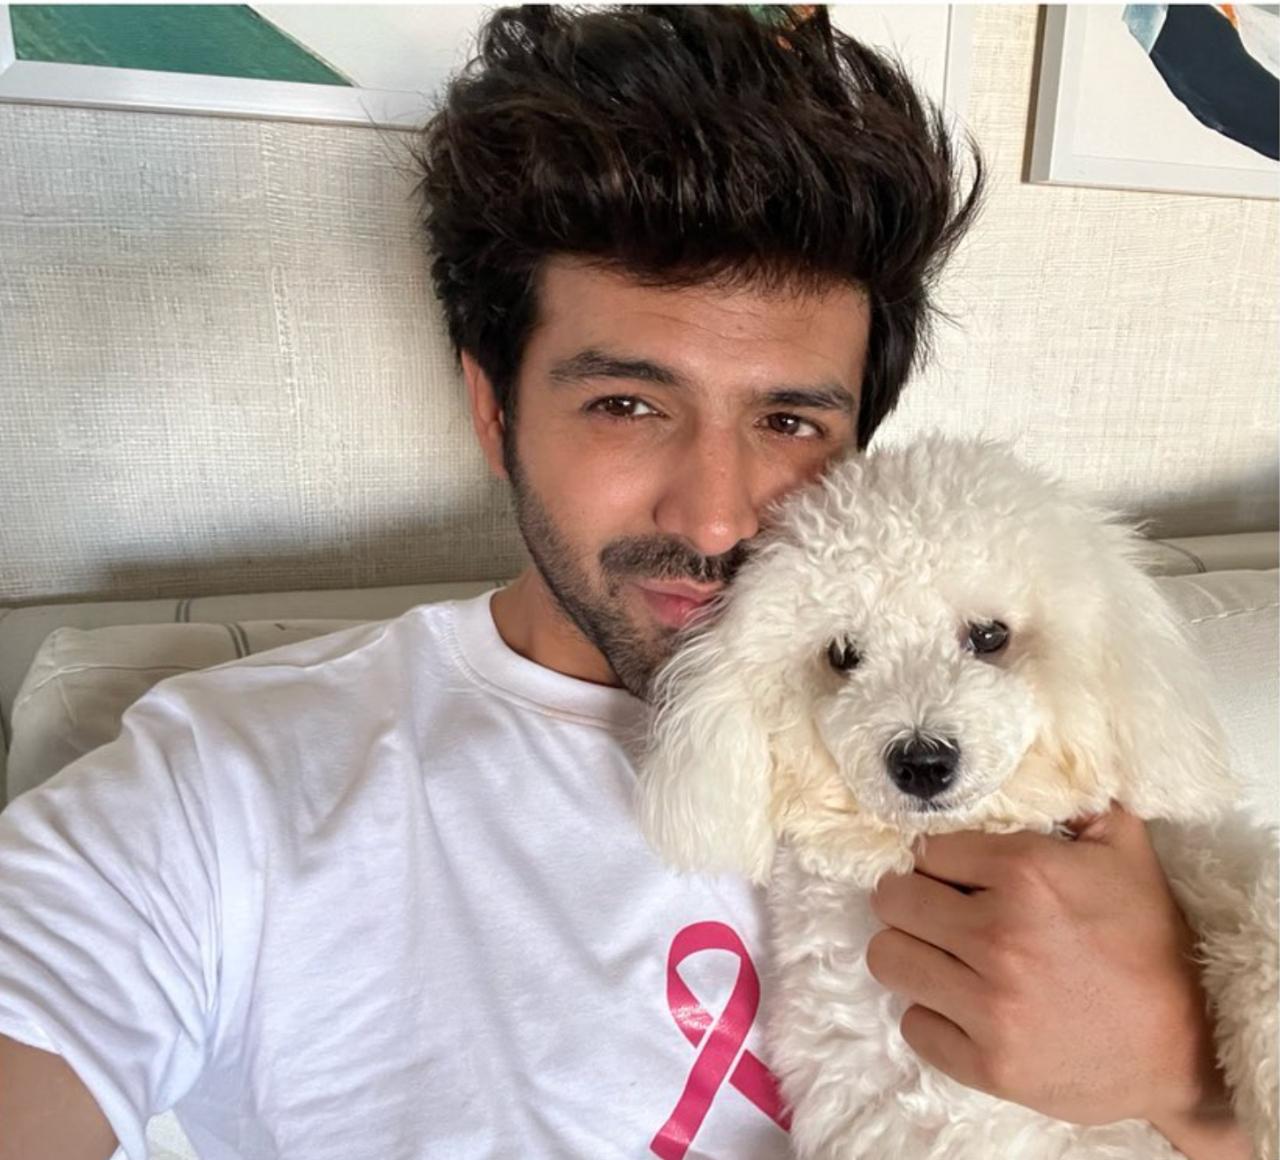 Kartik Aaryan's beloved dog, Katori, holds a cherished place in his heart, treated like a sibling by his caring mother and adored endlessly by the actor himself. Even when away on shoots, Kartik can't resist sharing sweet posts of Katori, keeping the bond alive across distances.